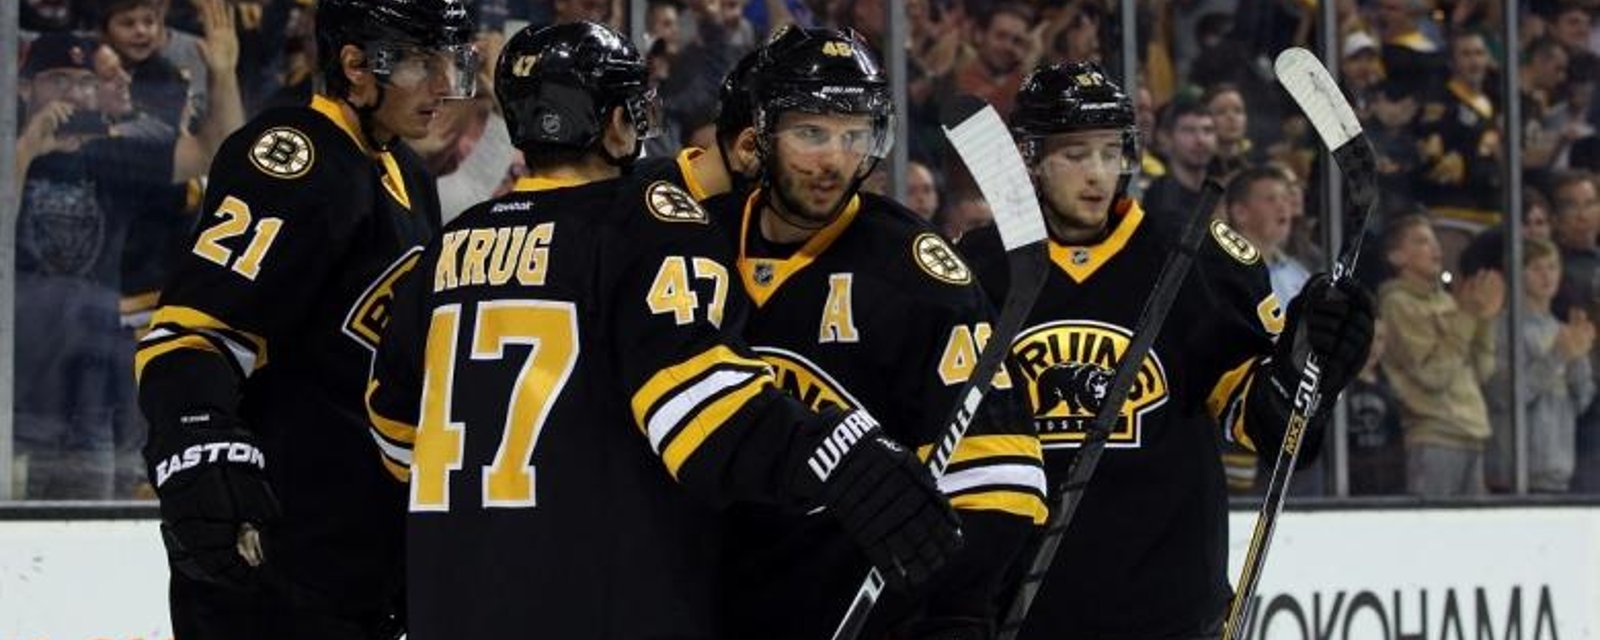 Two devastating injuries for the Bruins, could miss games next season.